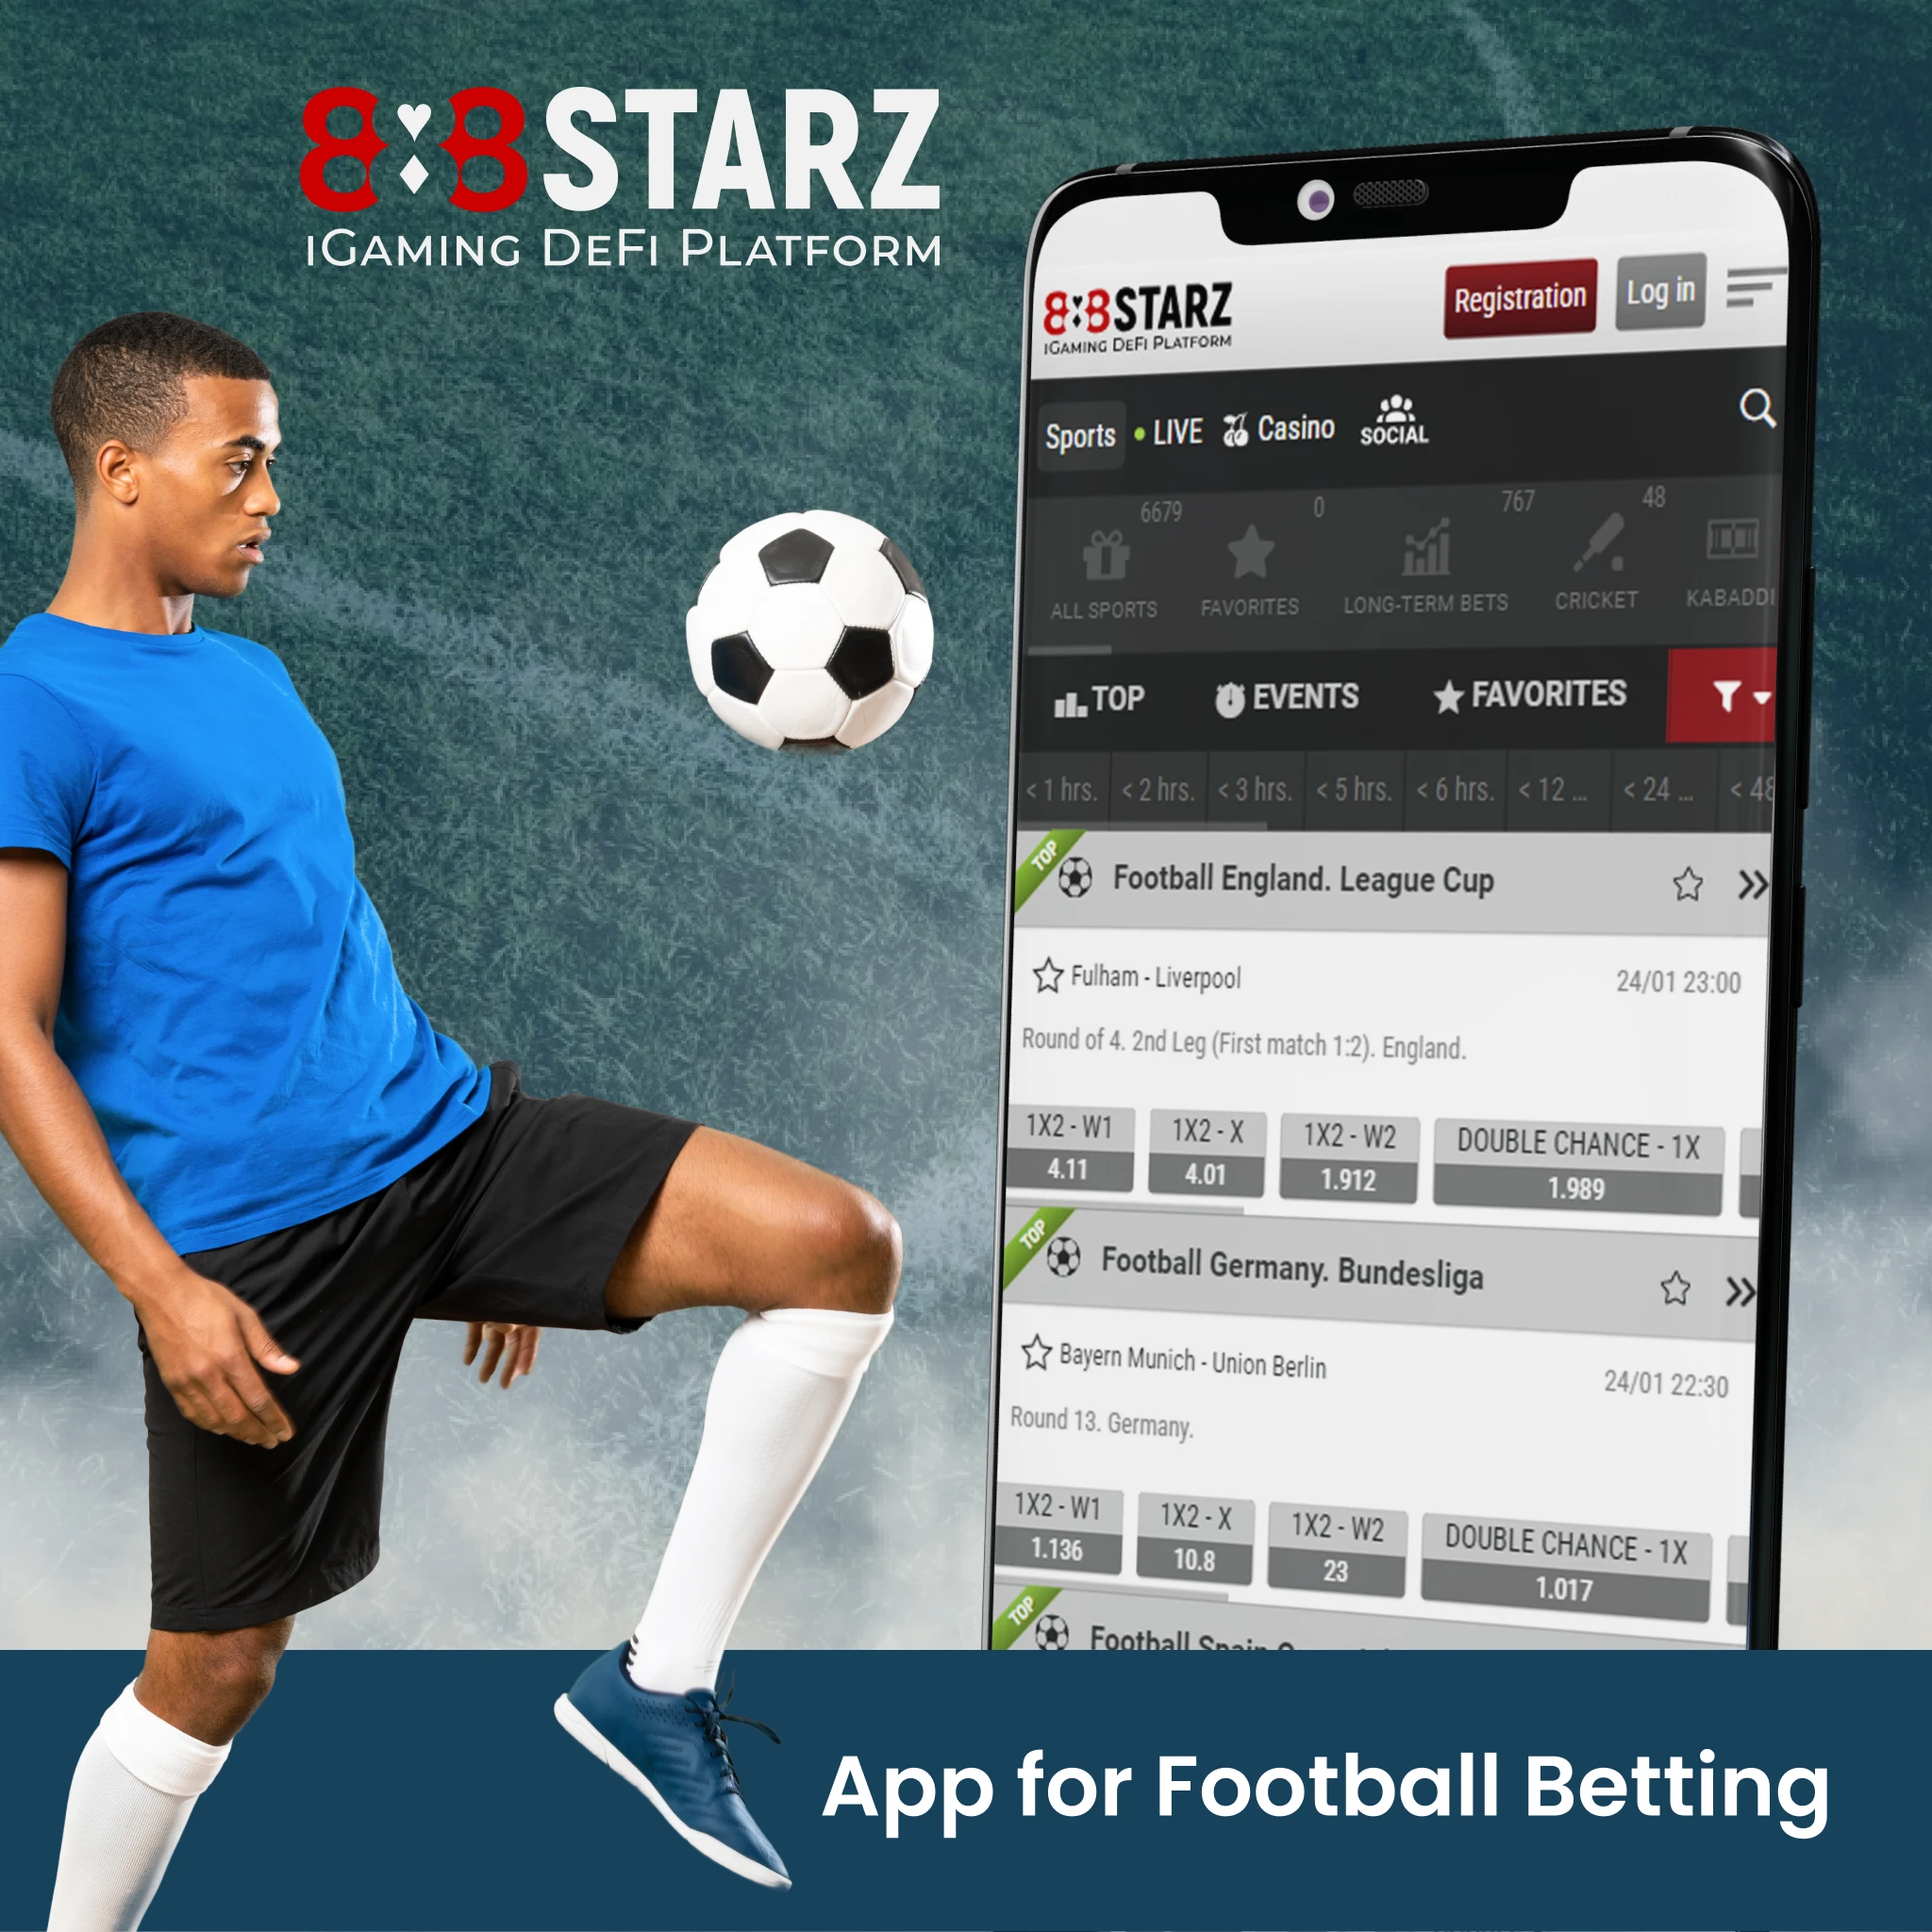 Online football betting is safe and secure for users of 888Starz mobile app.